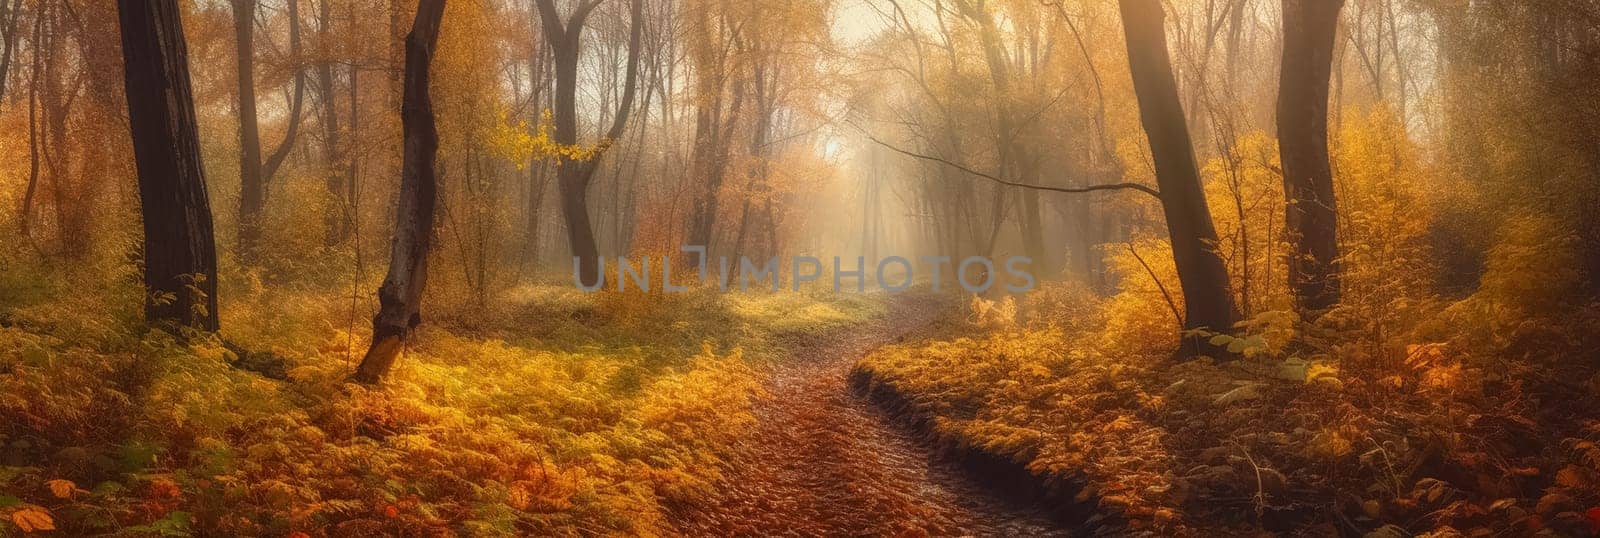 Deep Autumn forest and leaves fall on ground. Golden fall landscape or autumnal background with smoky sunlight and rays.